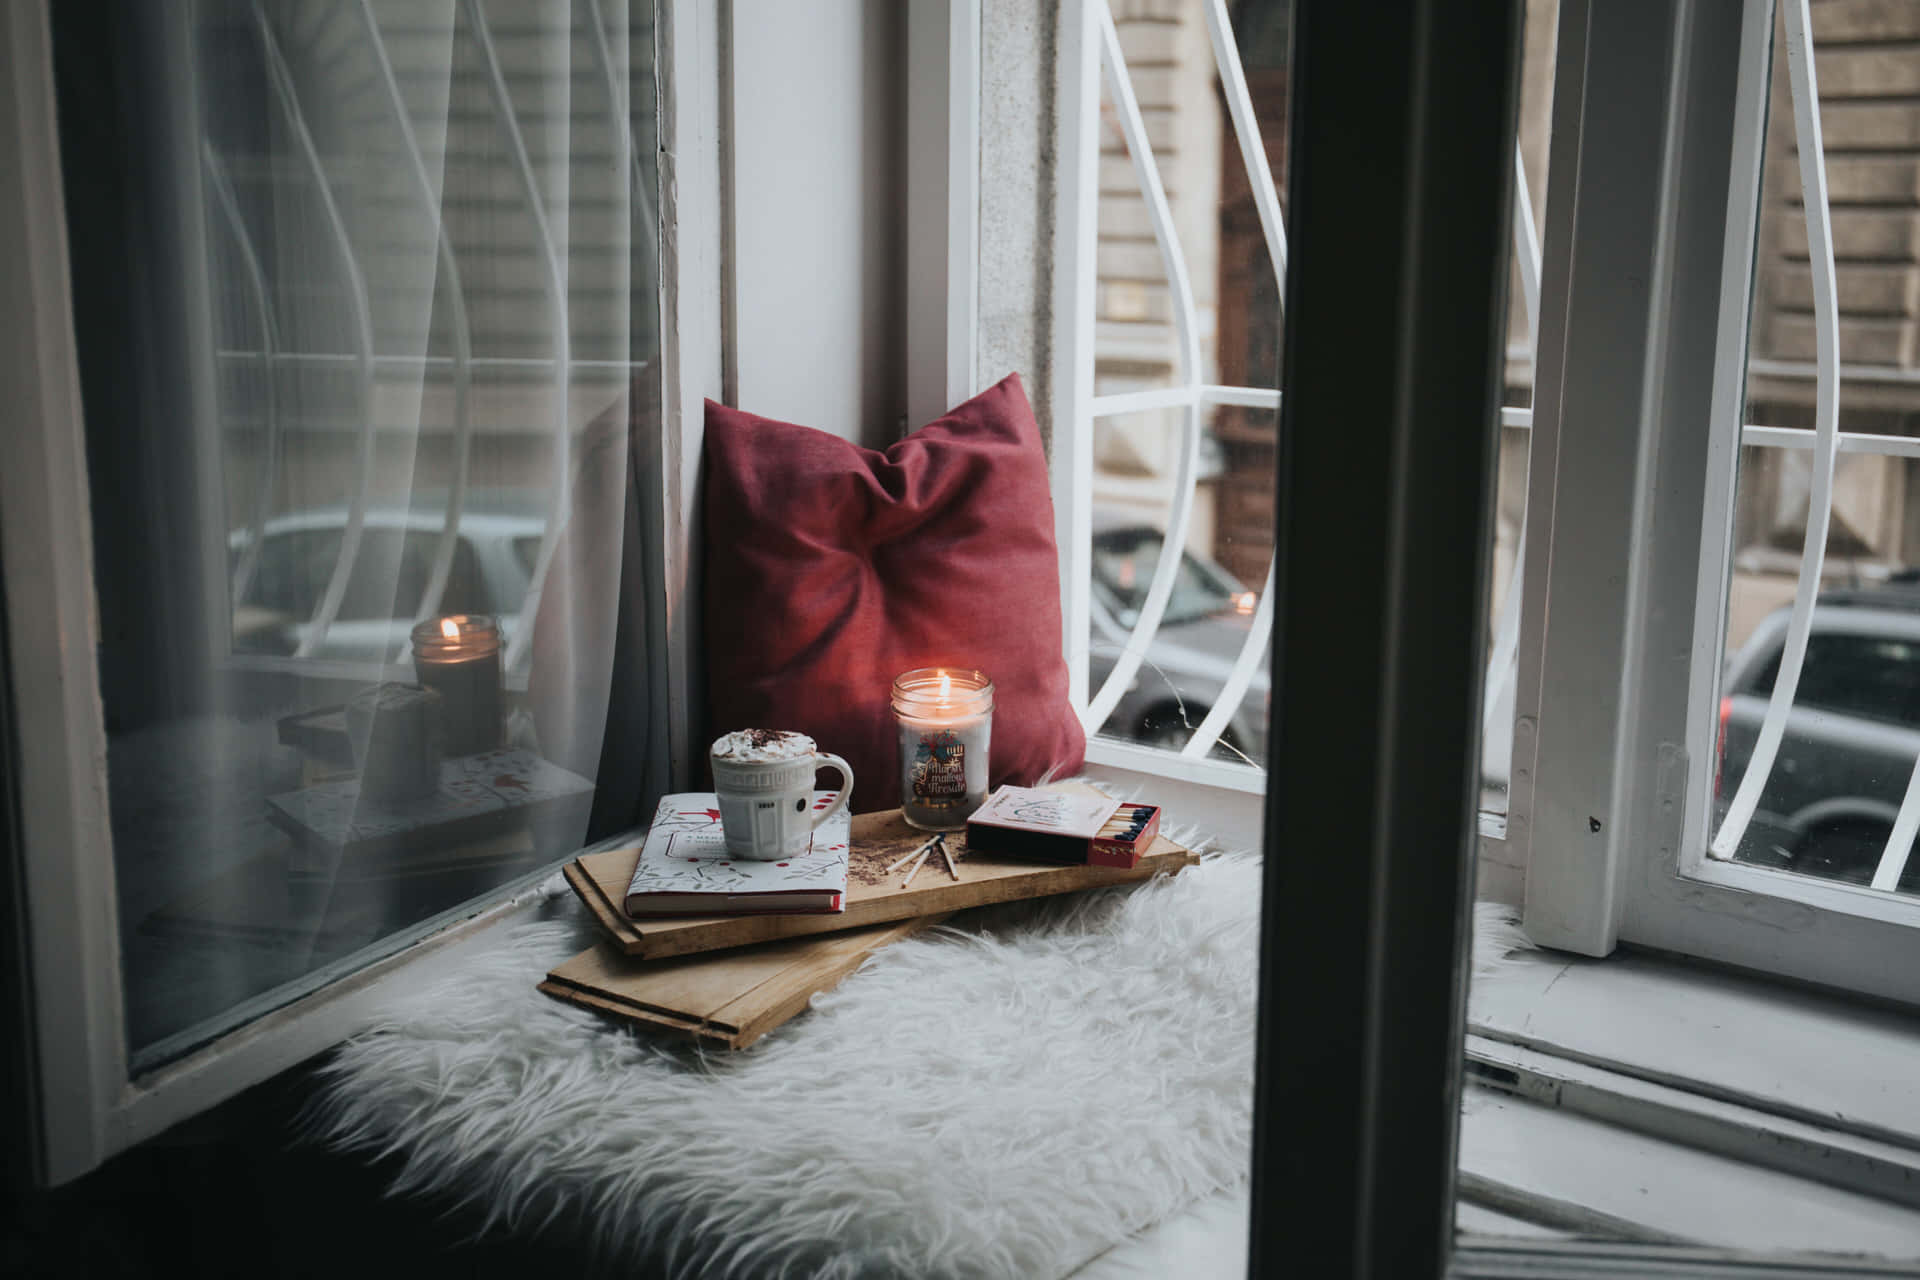 Cozy Window Nookwith Candleand Books.jpg Wallpaper